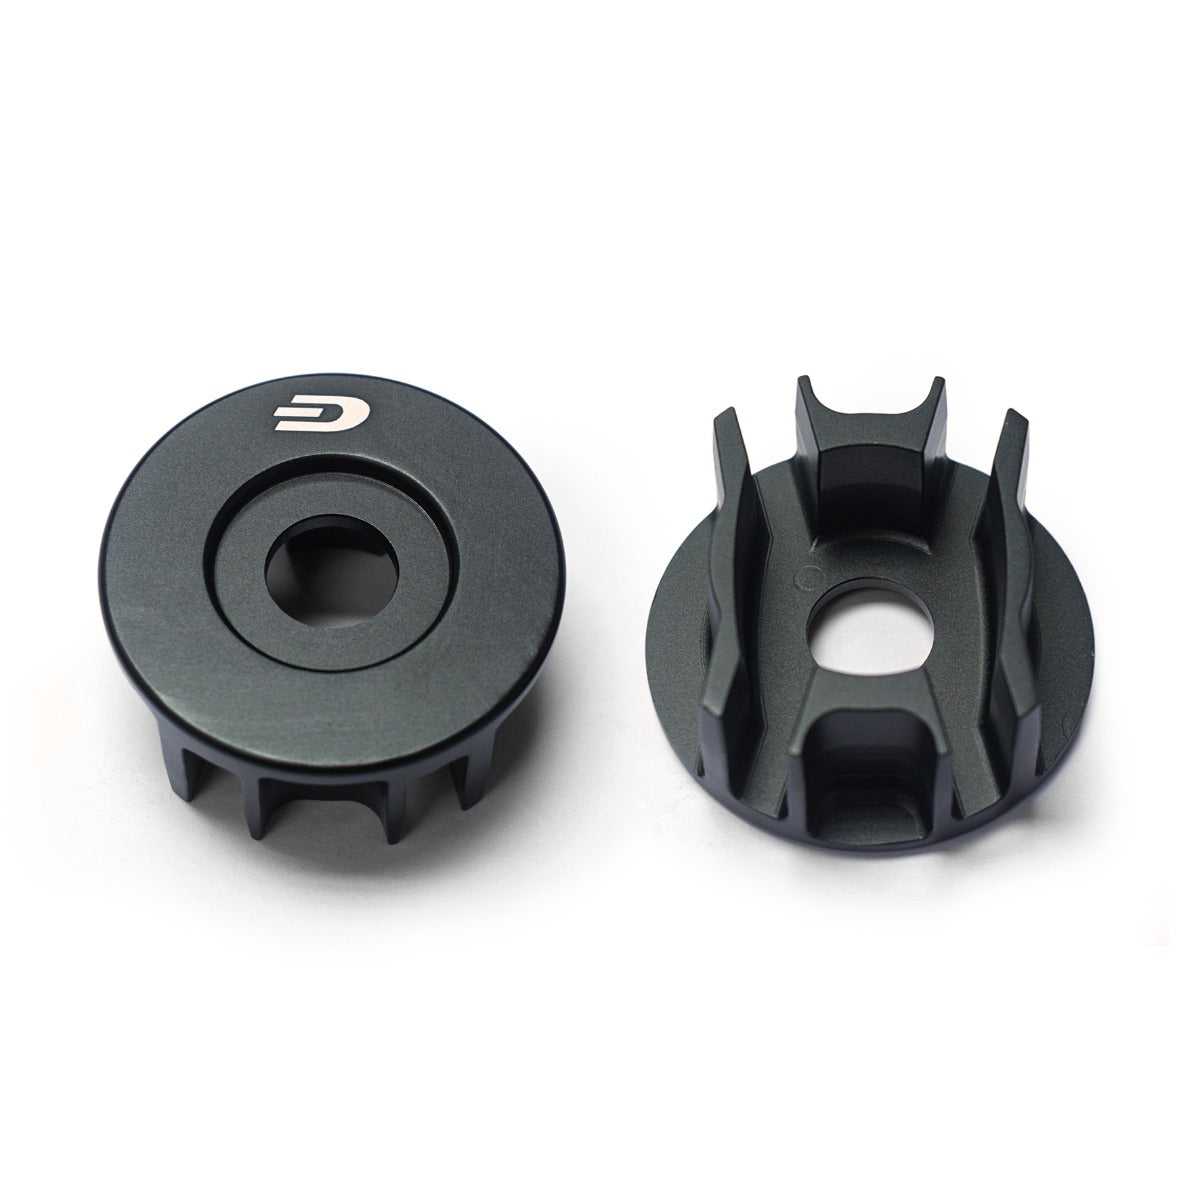 Direnza, Direnza - Audi A4 / S4 / RS4 / B8 / B8.5 09-17 - Rear Differential Mount Inserts